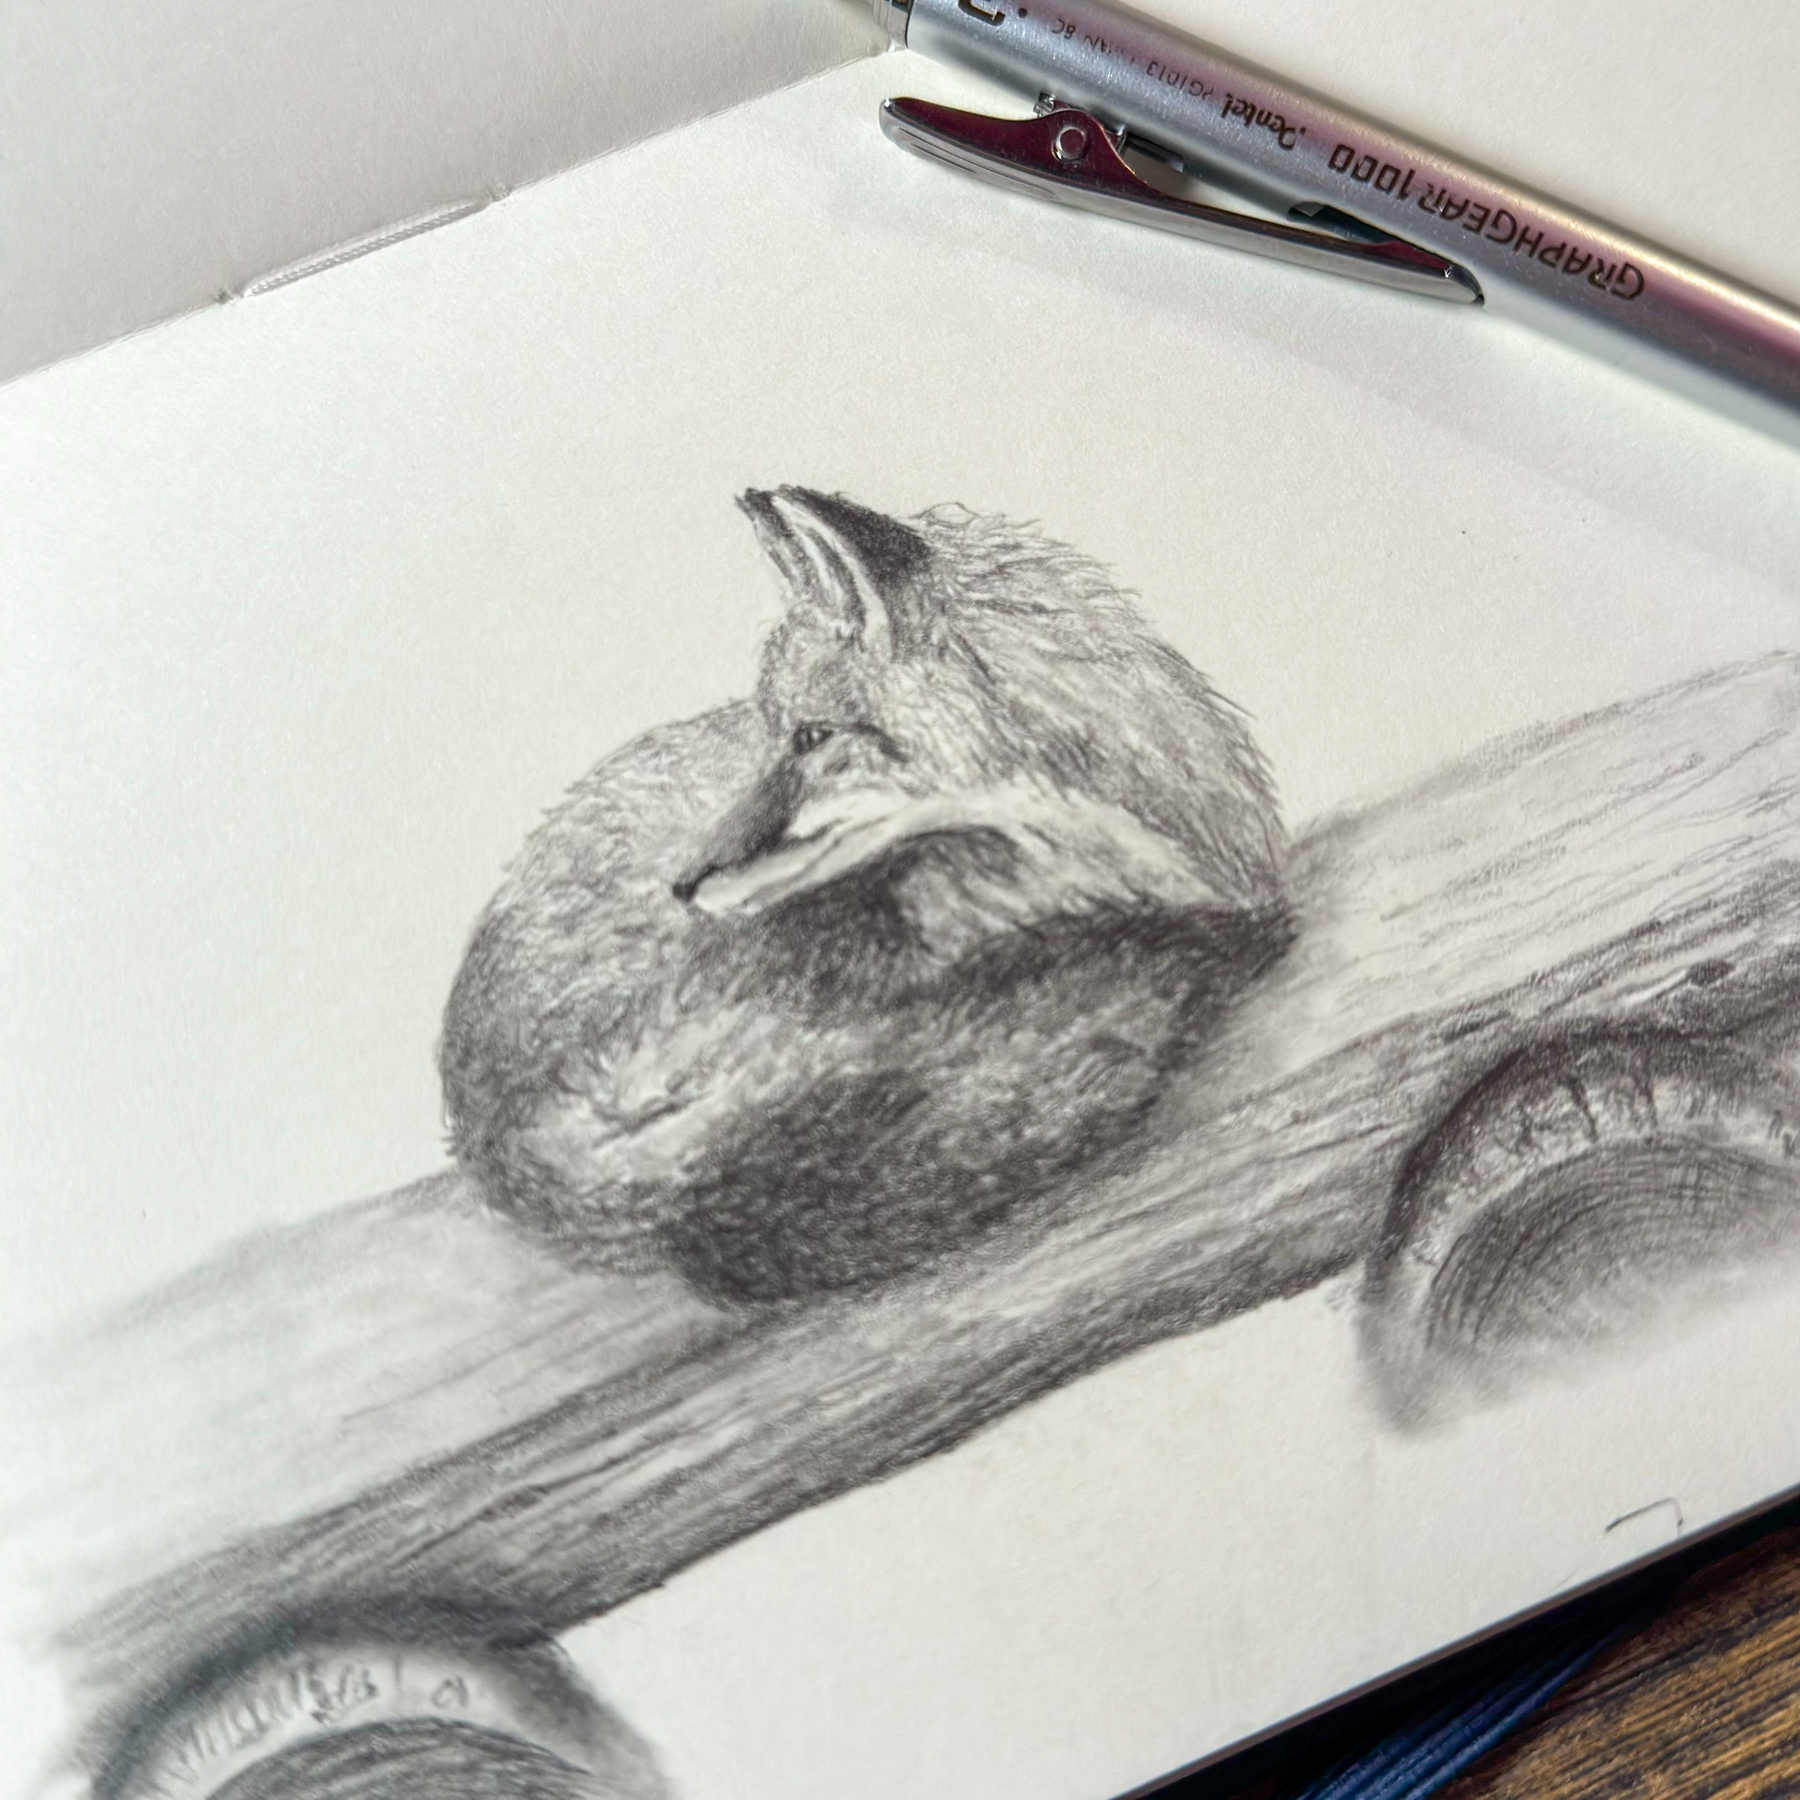 The image shows a sketch of a fox curled up and resting. The artwork is done in pencil, showcasing detailed fur texture and shading to create a realistic appearance. The sketch is on a white paper surface, and there are a couple of drawing pens laid to the side, indicating an artist’s workspace.